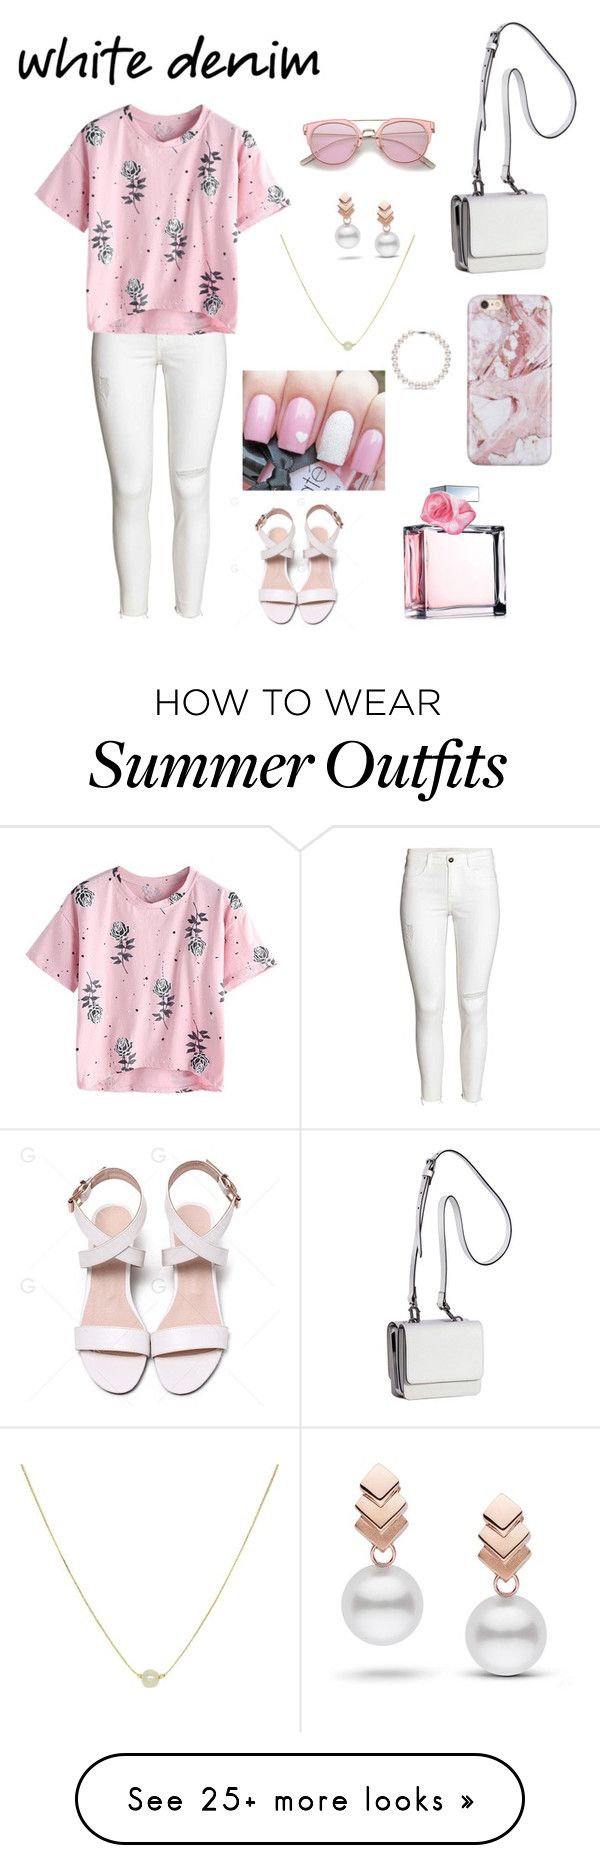 "White denim outfit" by cheleniak on Polyvore featuring Kendall + Kyli...